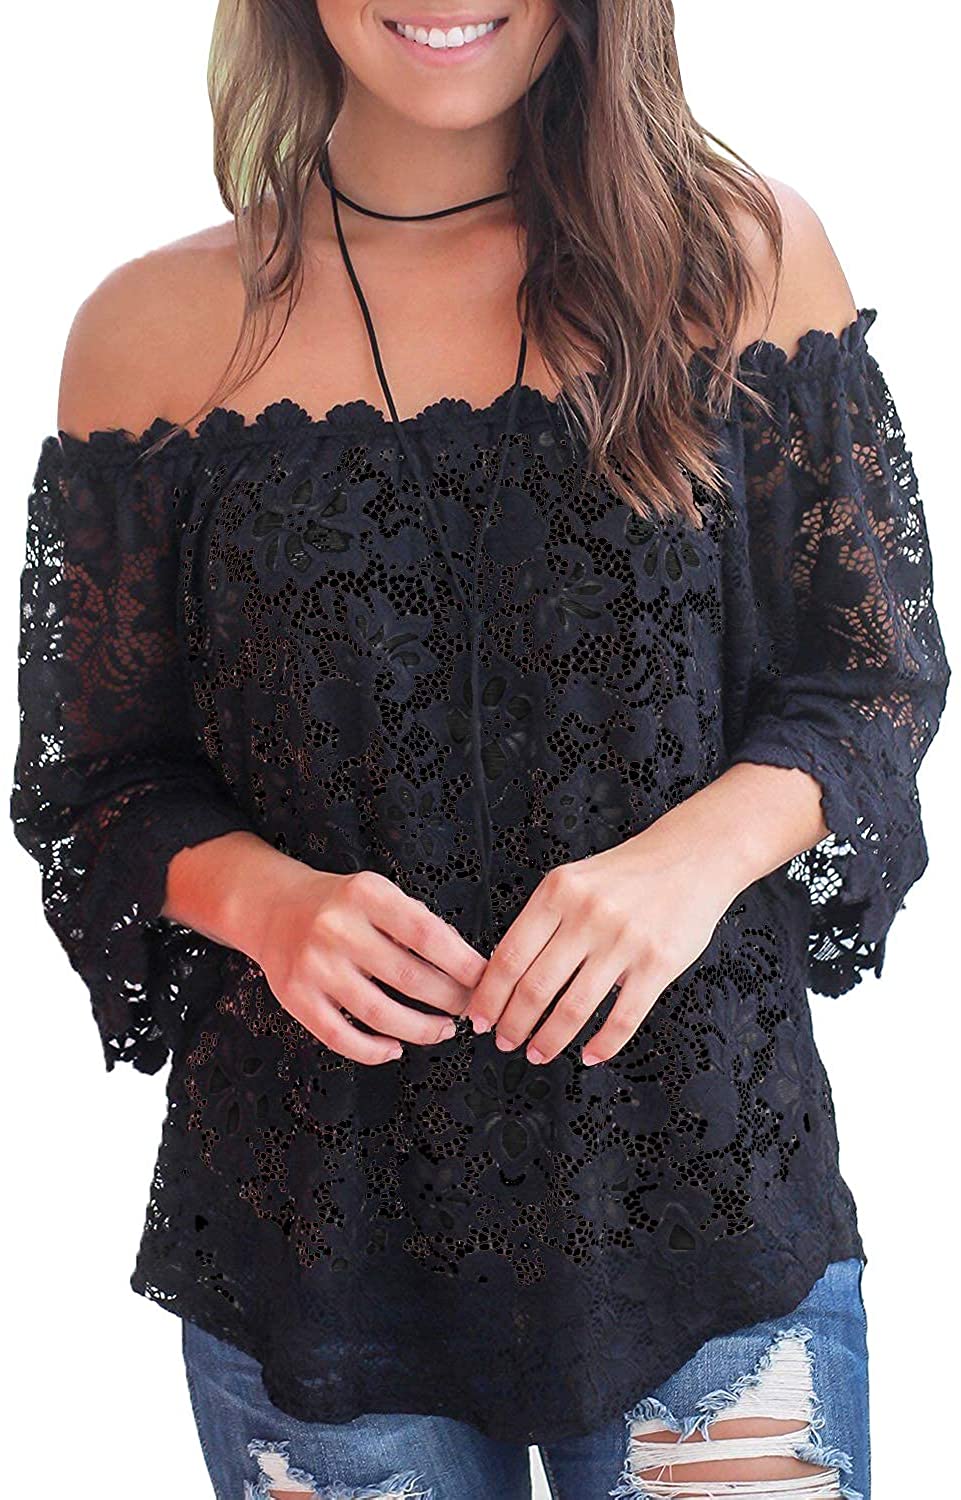 MIHOLL Lace Off Shoulder Tops Casual Loose Blouse Shirts | eBay